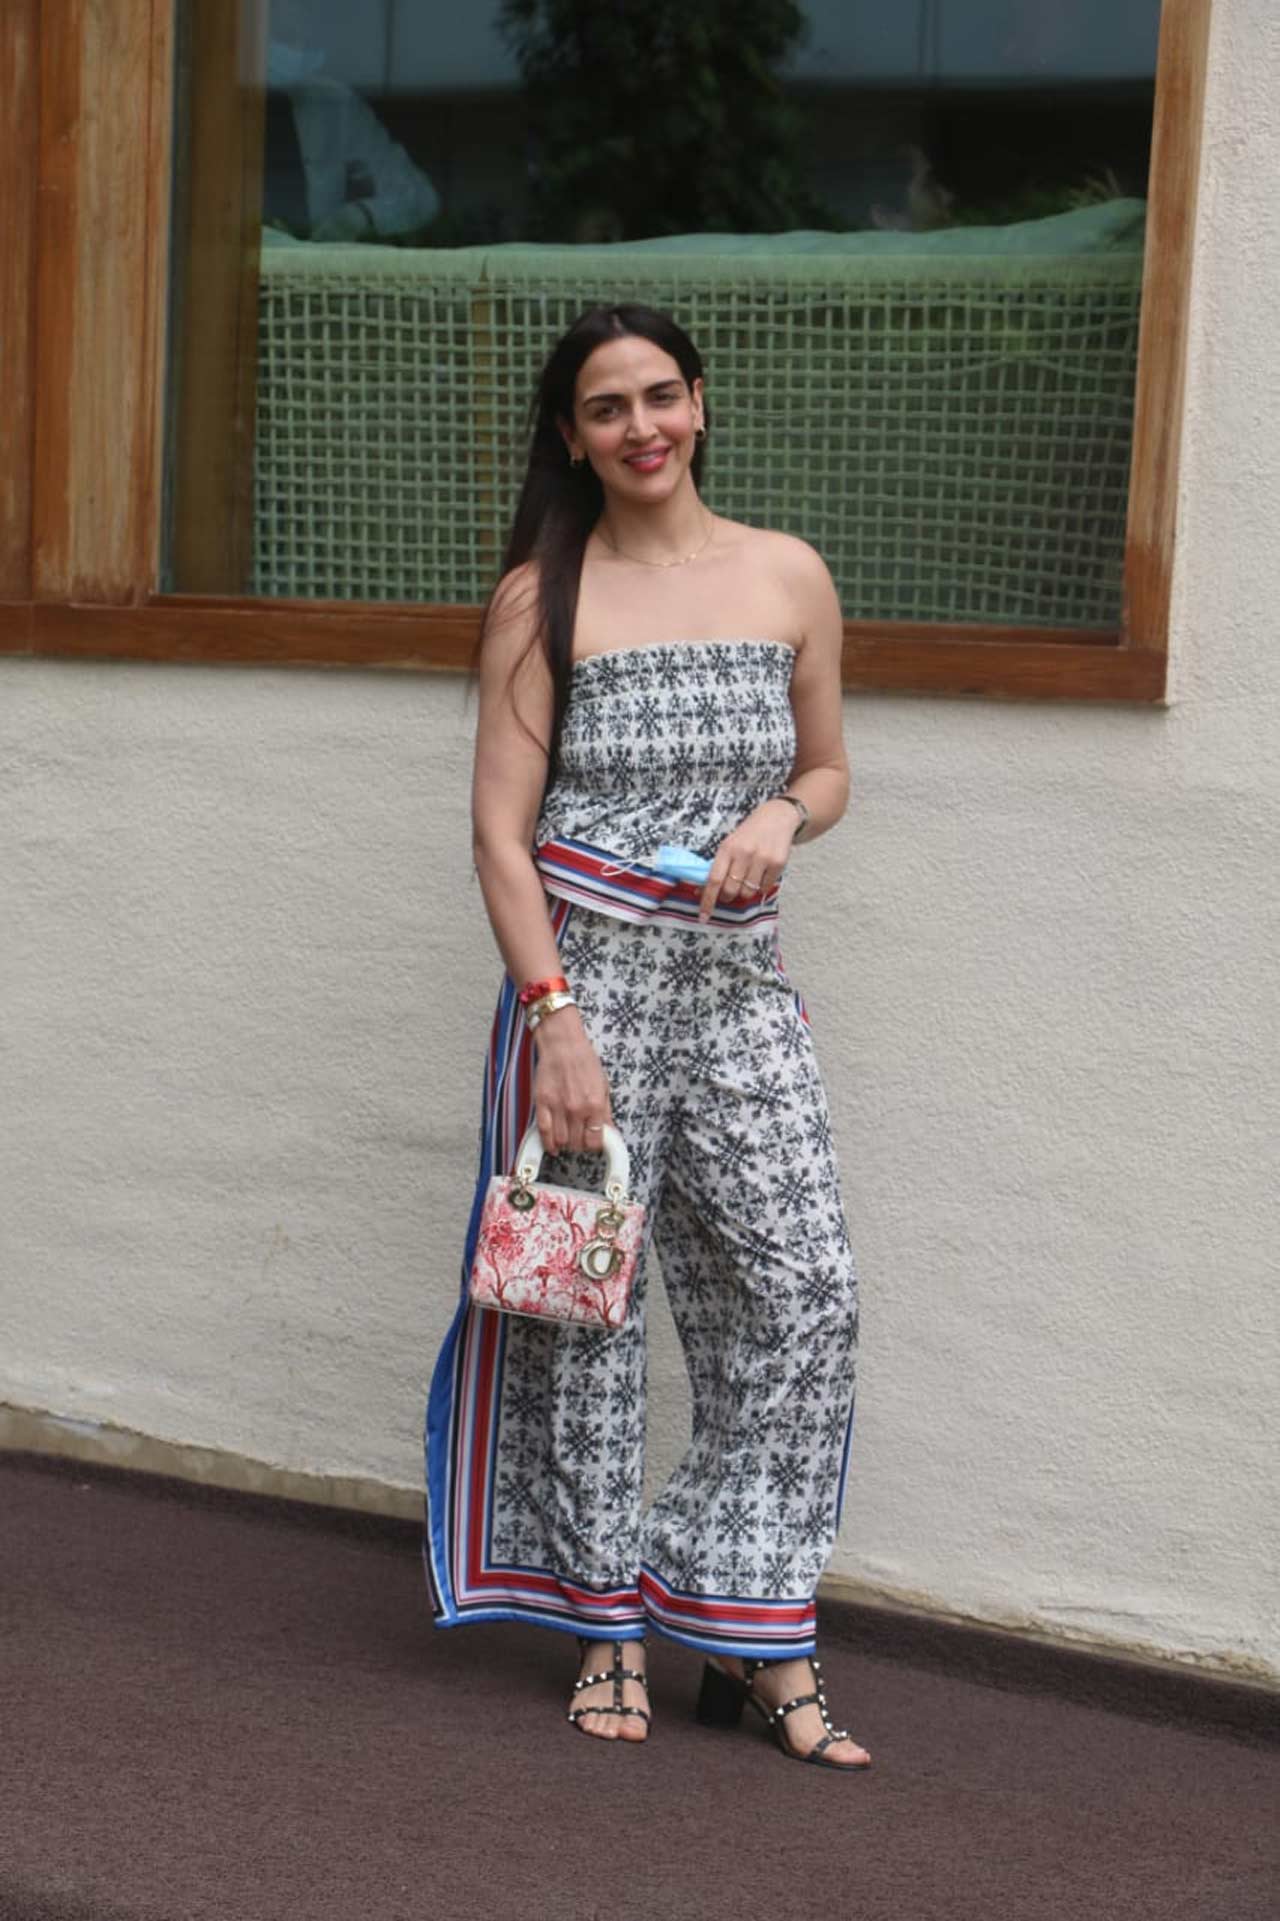 Esha Deol, who will be next seen in 'Ek Duaa,' her web debut, was all smiles when snapped in the city.